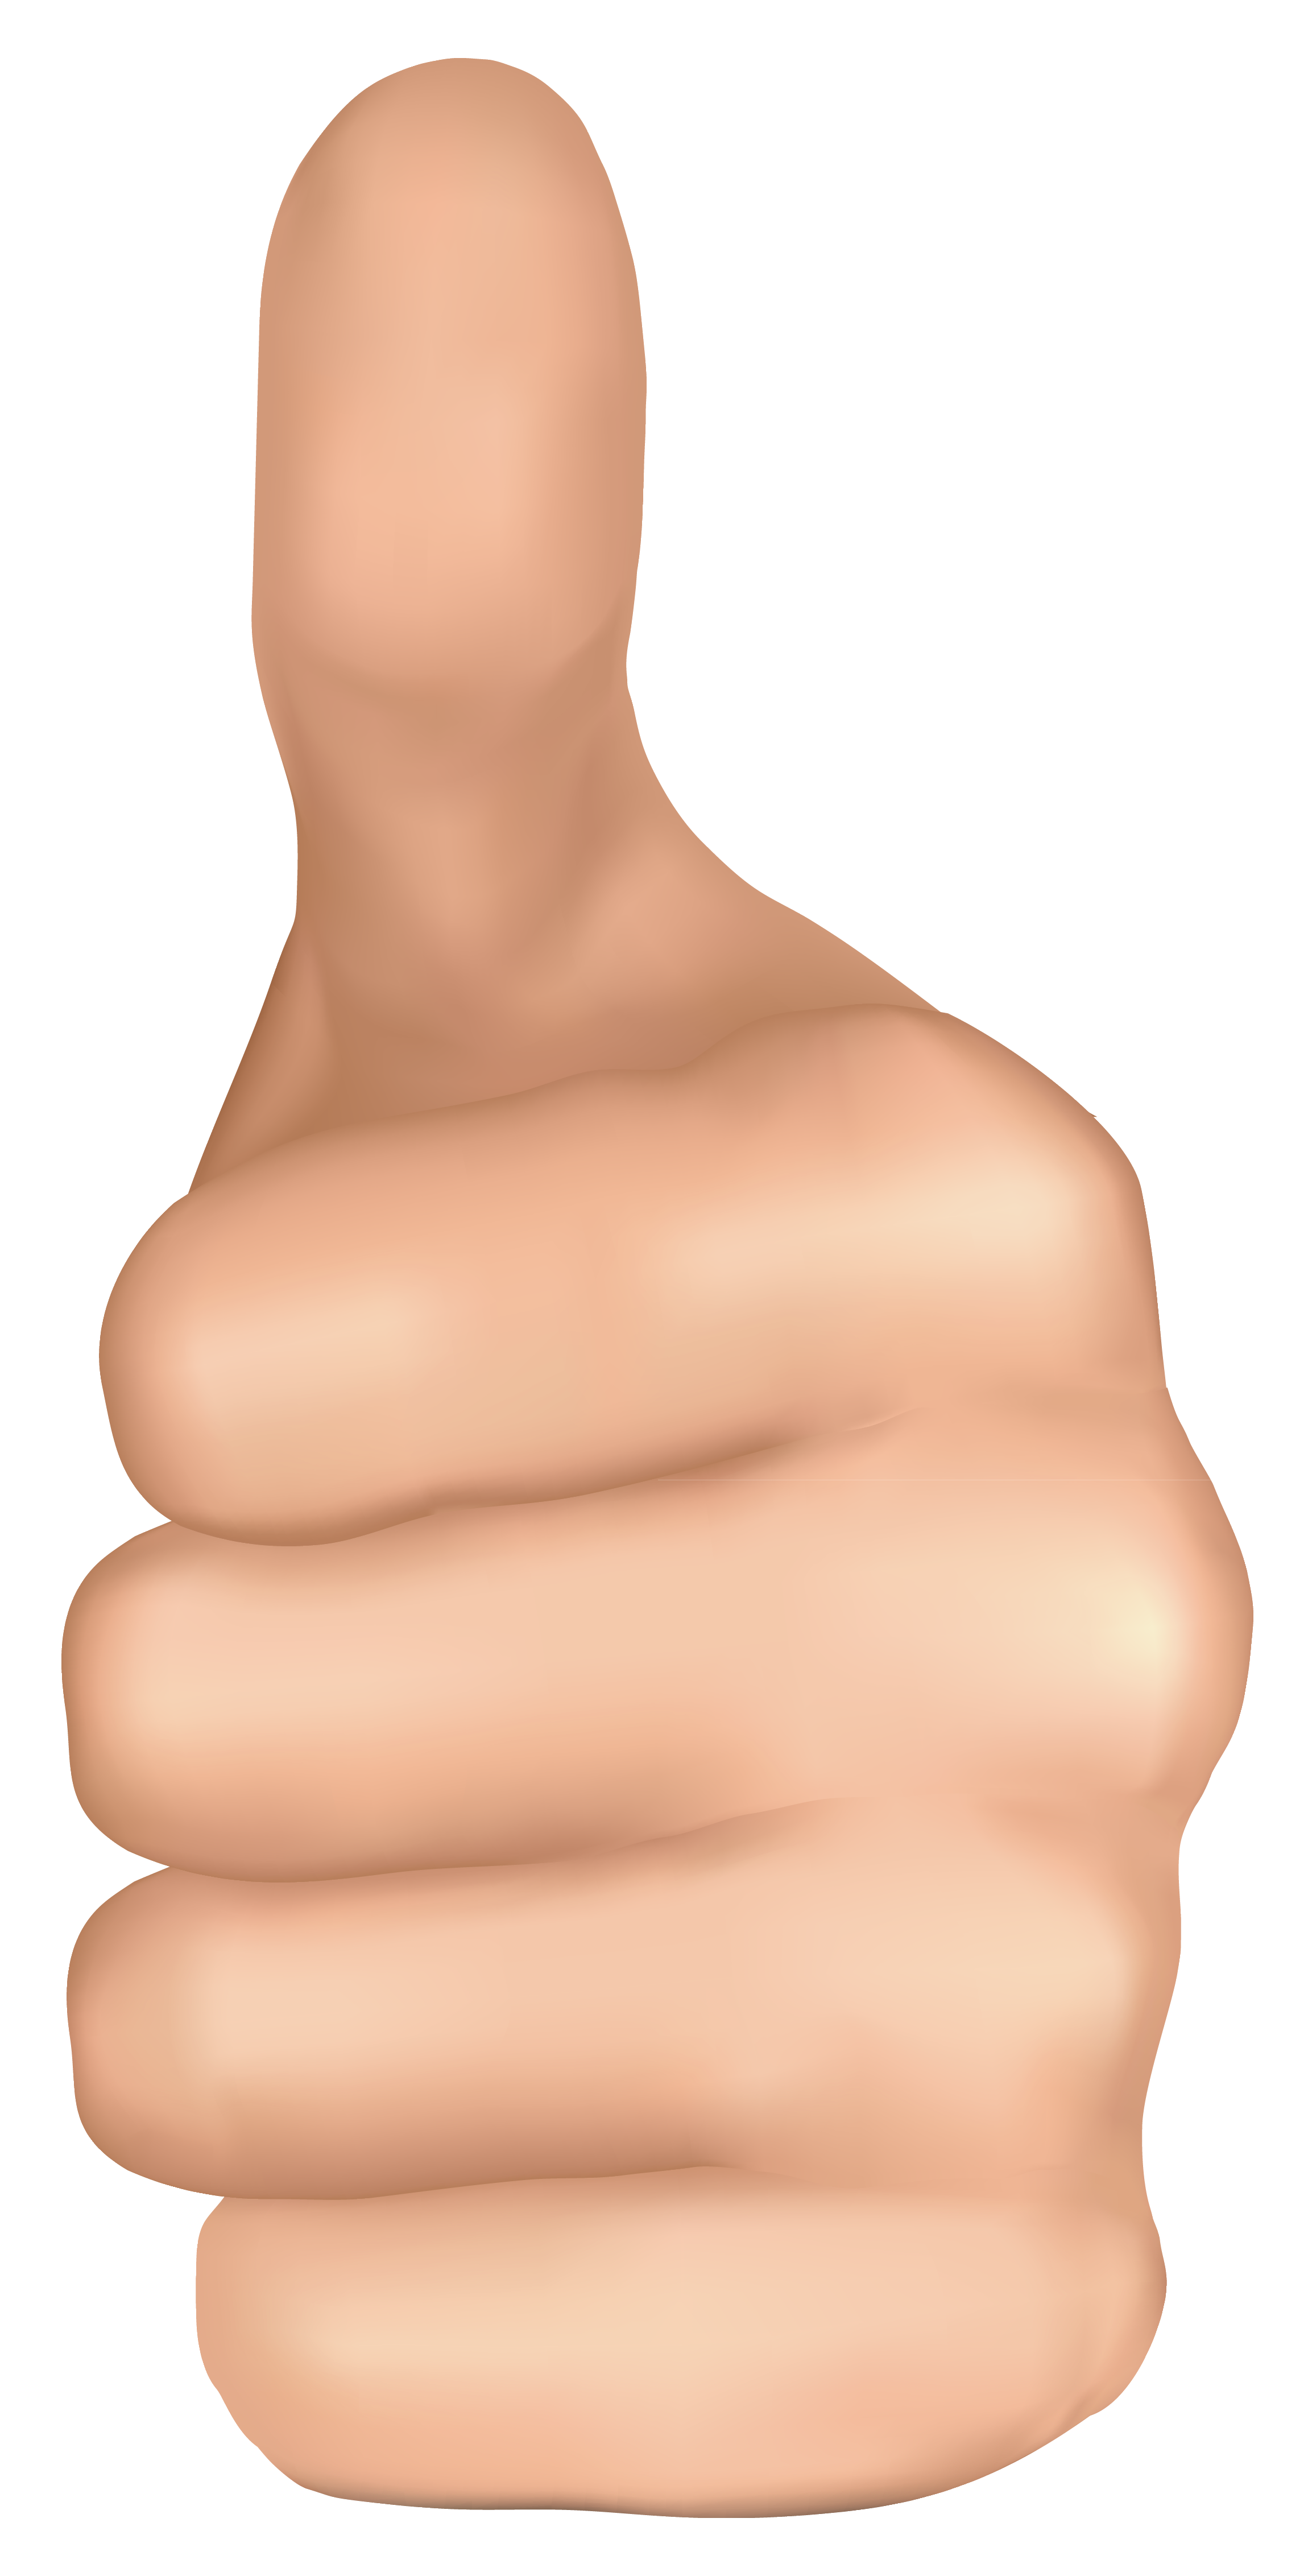 Thumb Up Hand PNG Clipart Image